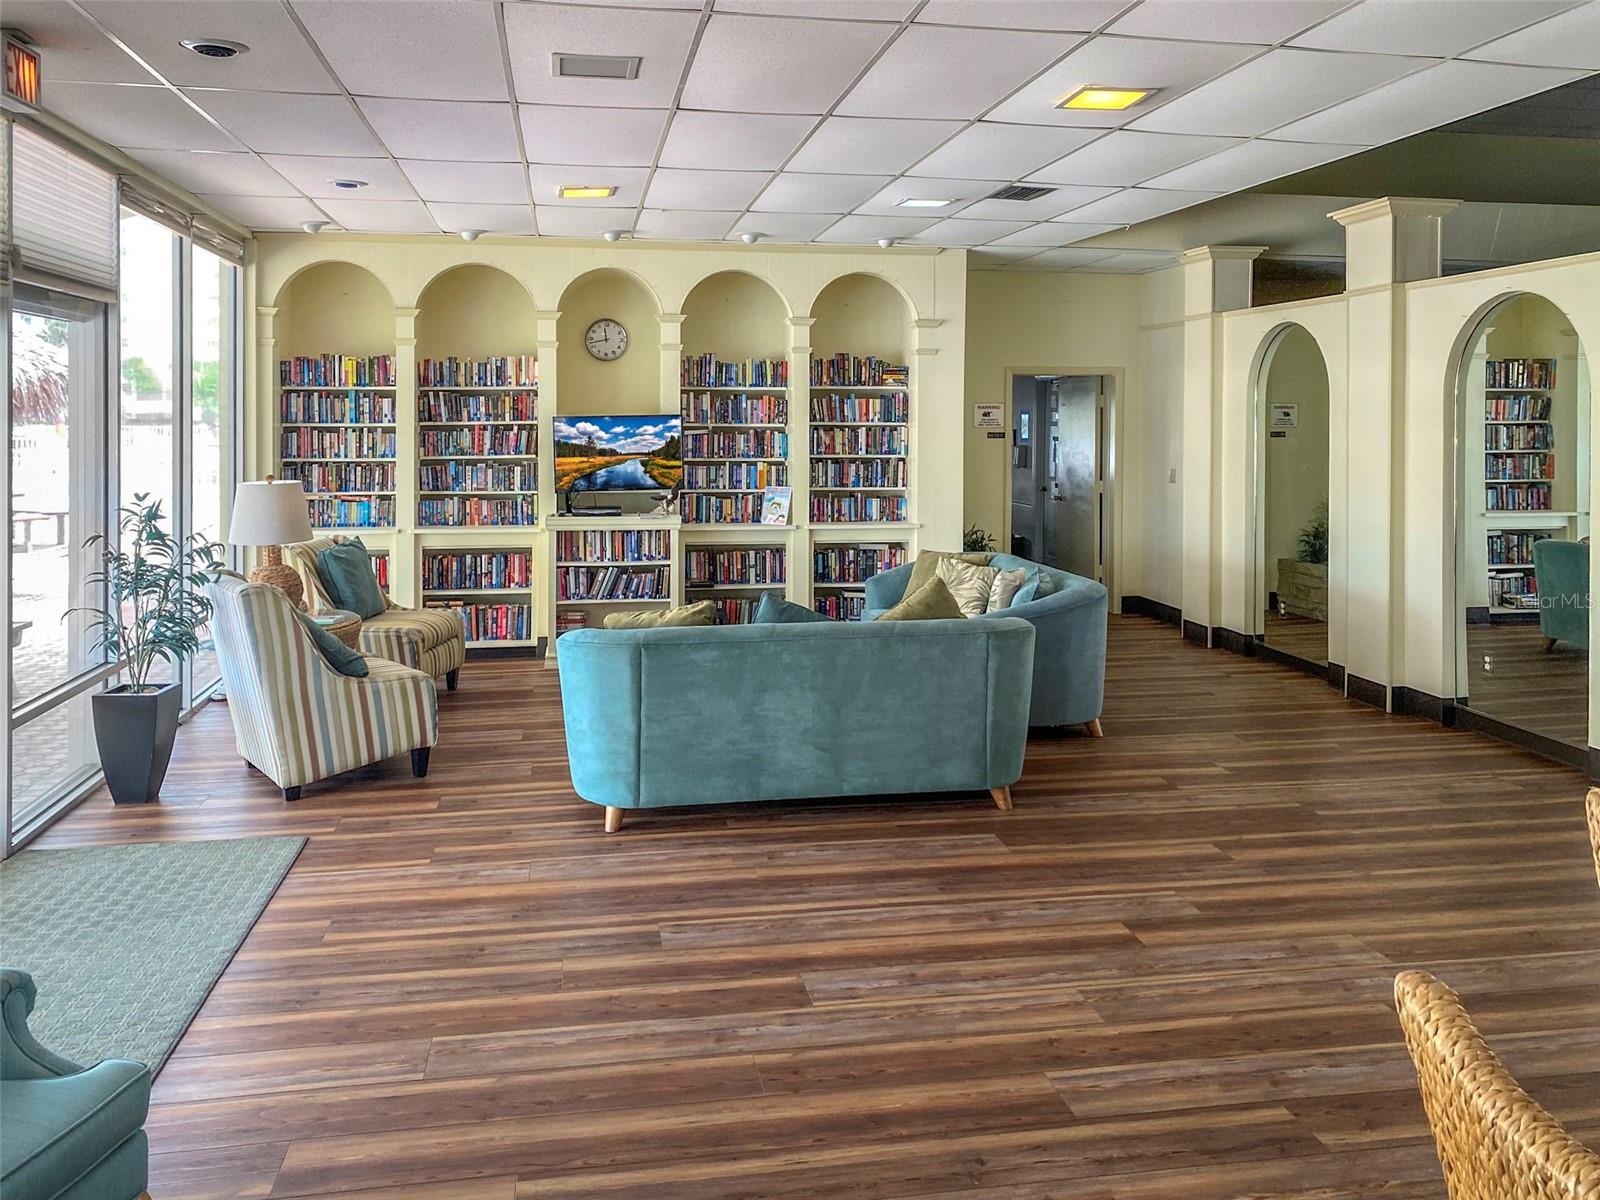 Clubhouse - Library/Sitting Area